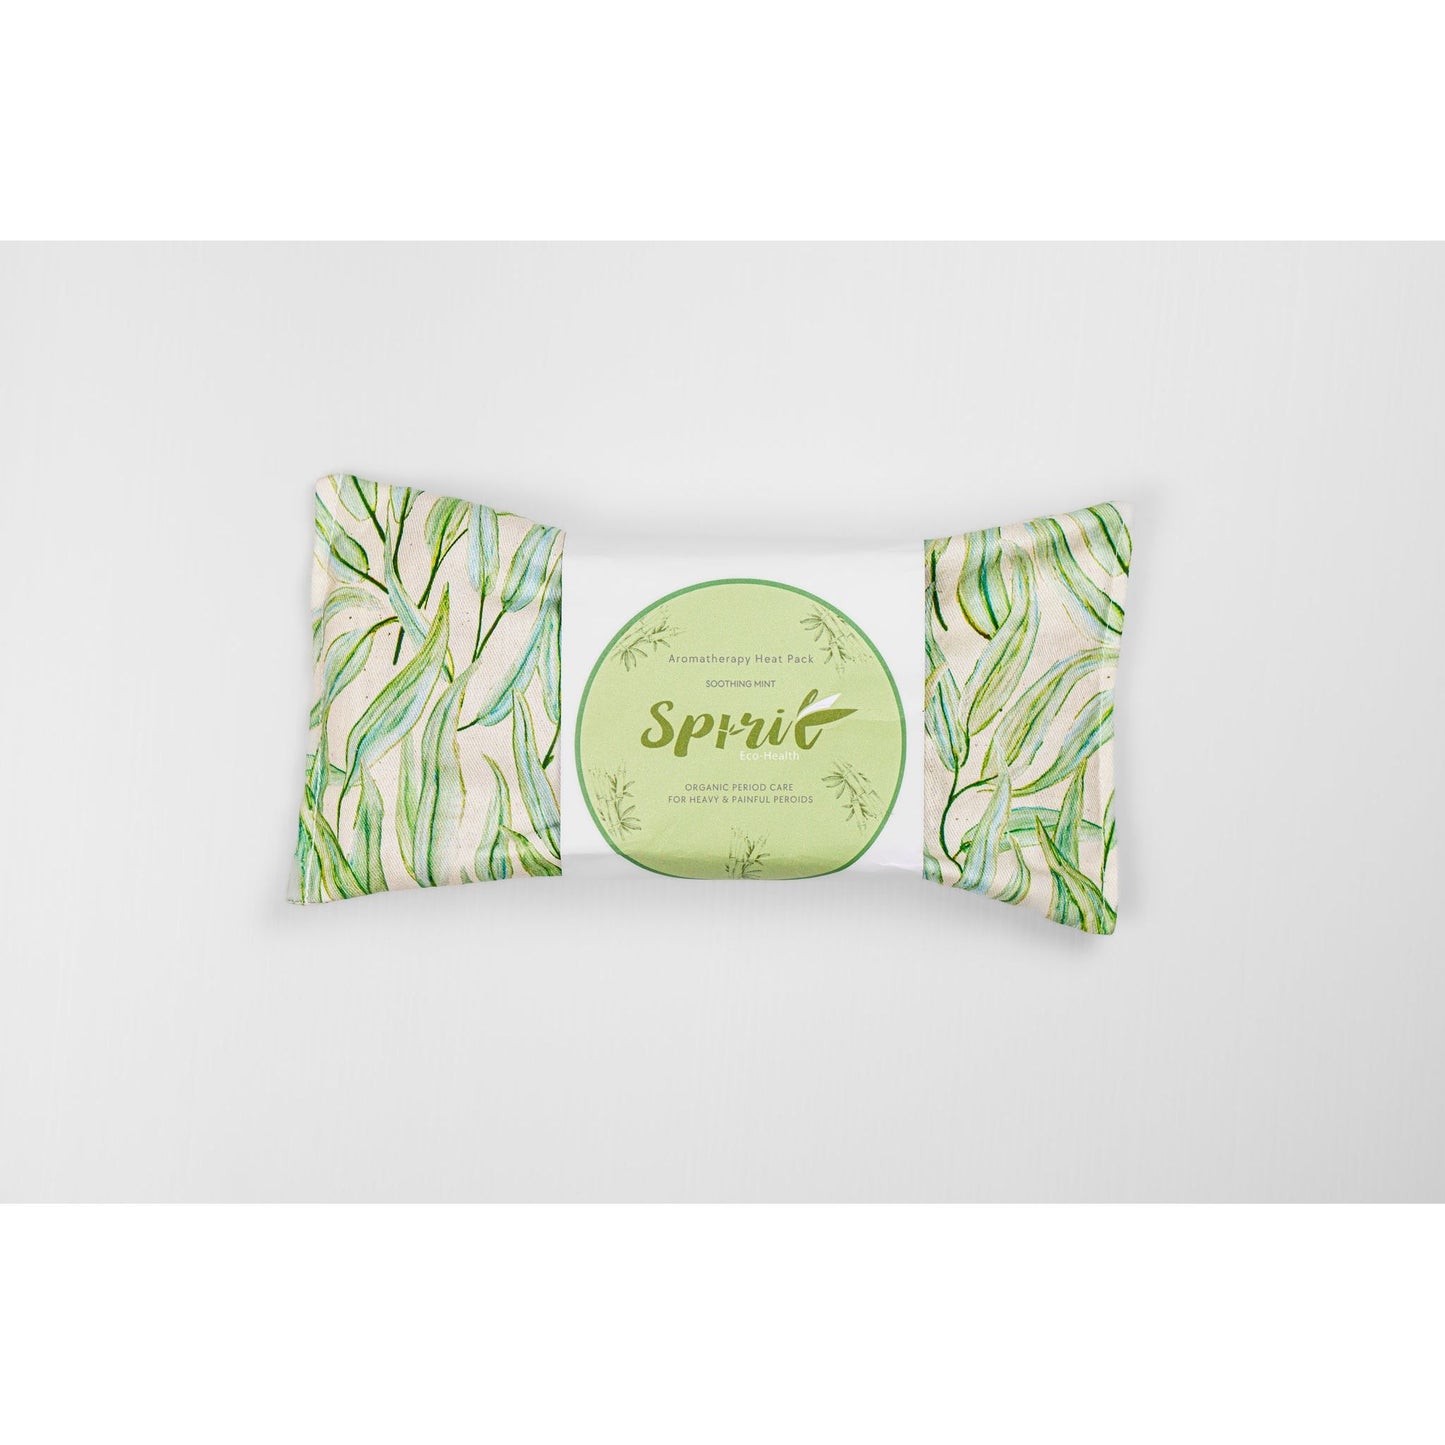 Microwave Heat Pack in Green. Spirit Eco health heat packs for period pain 